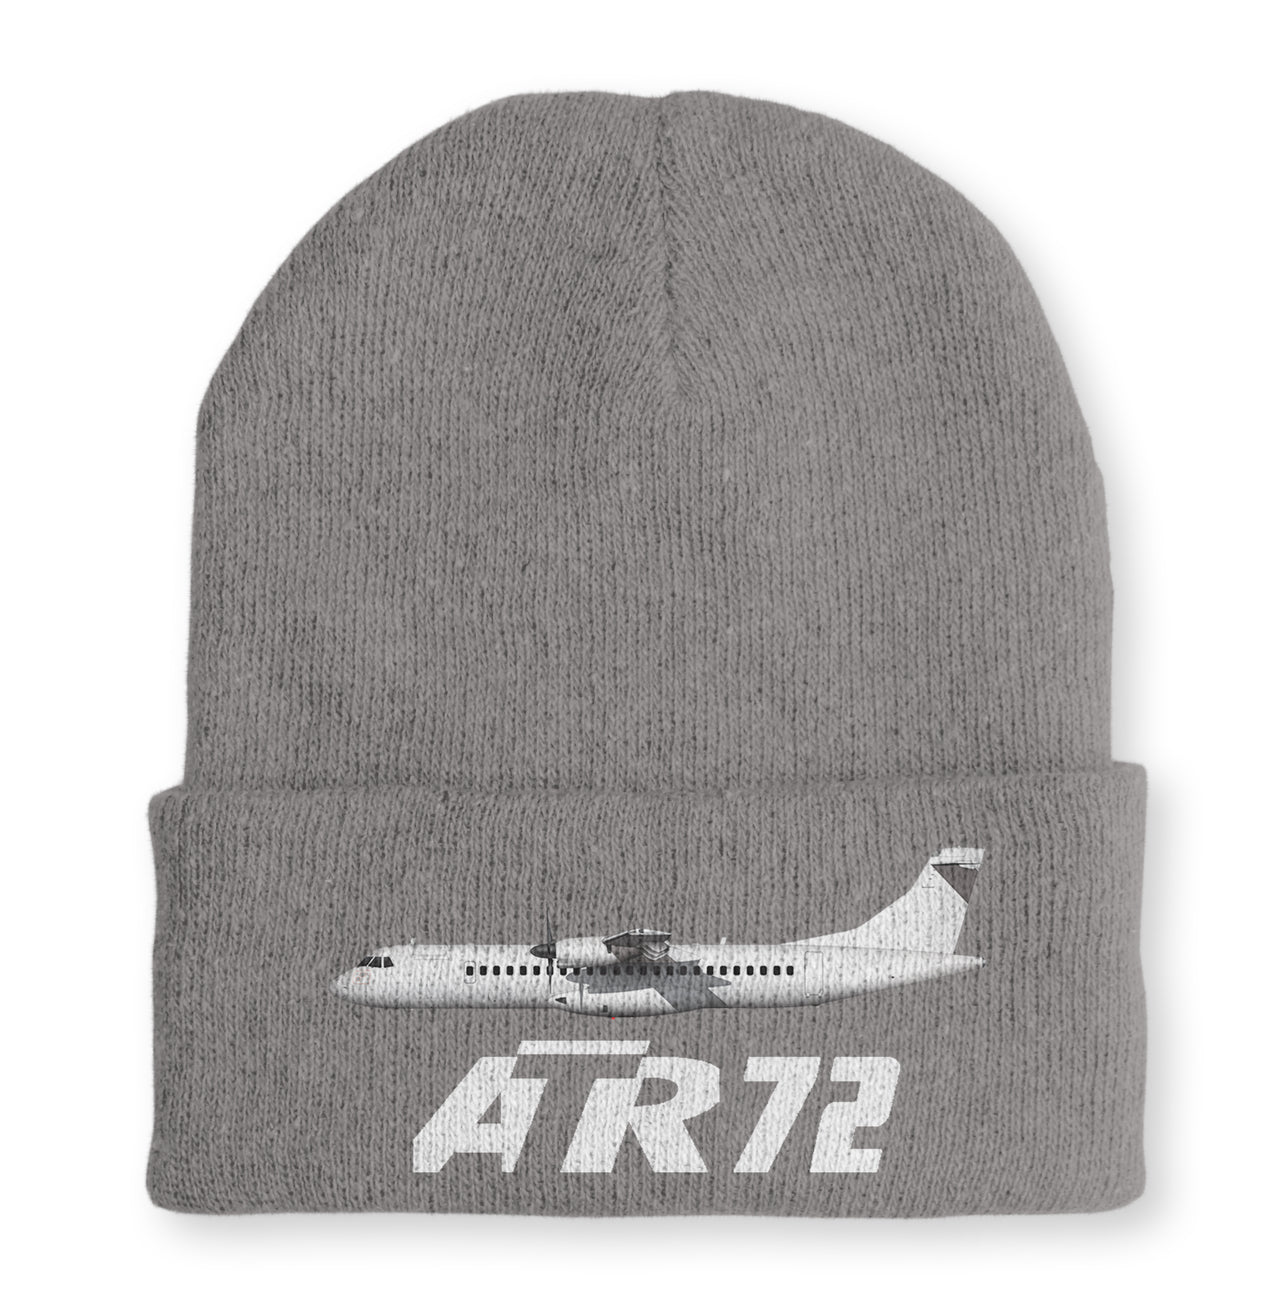 The ATR72 Embroidered Beanies